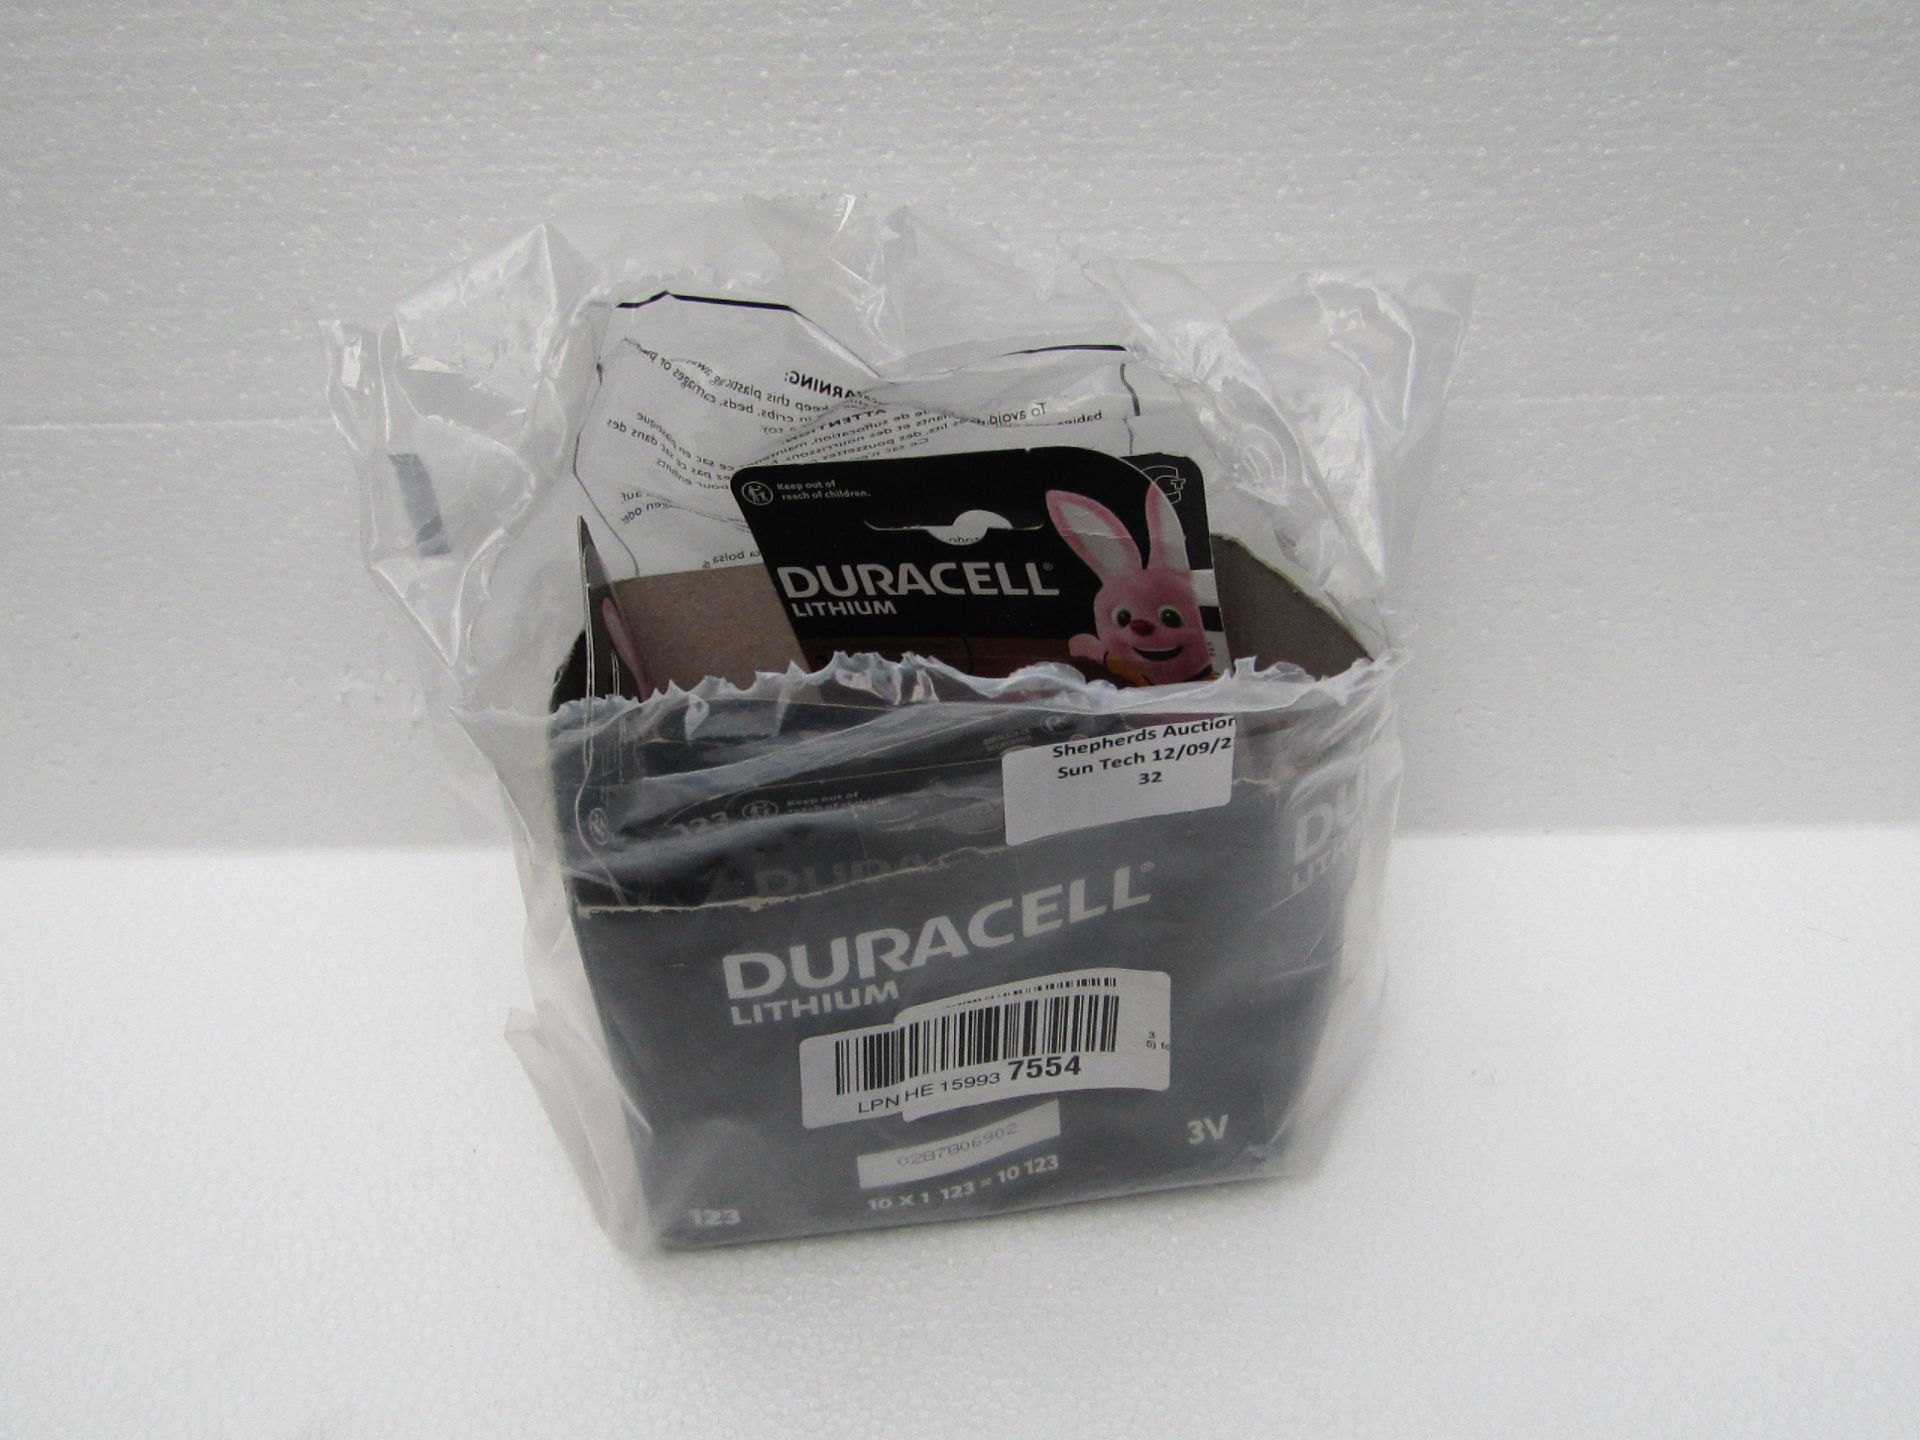 8x Duracell CR123 batteries, new and packaged.